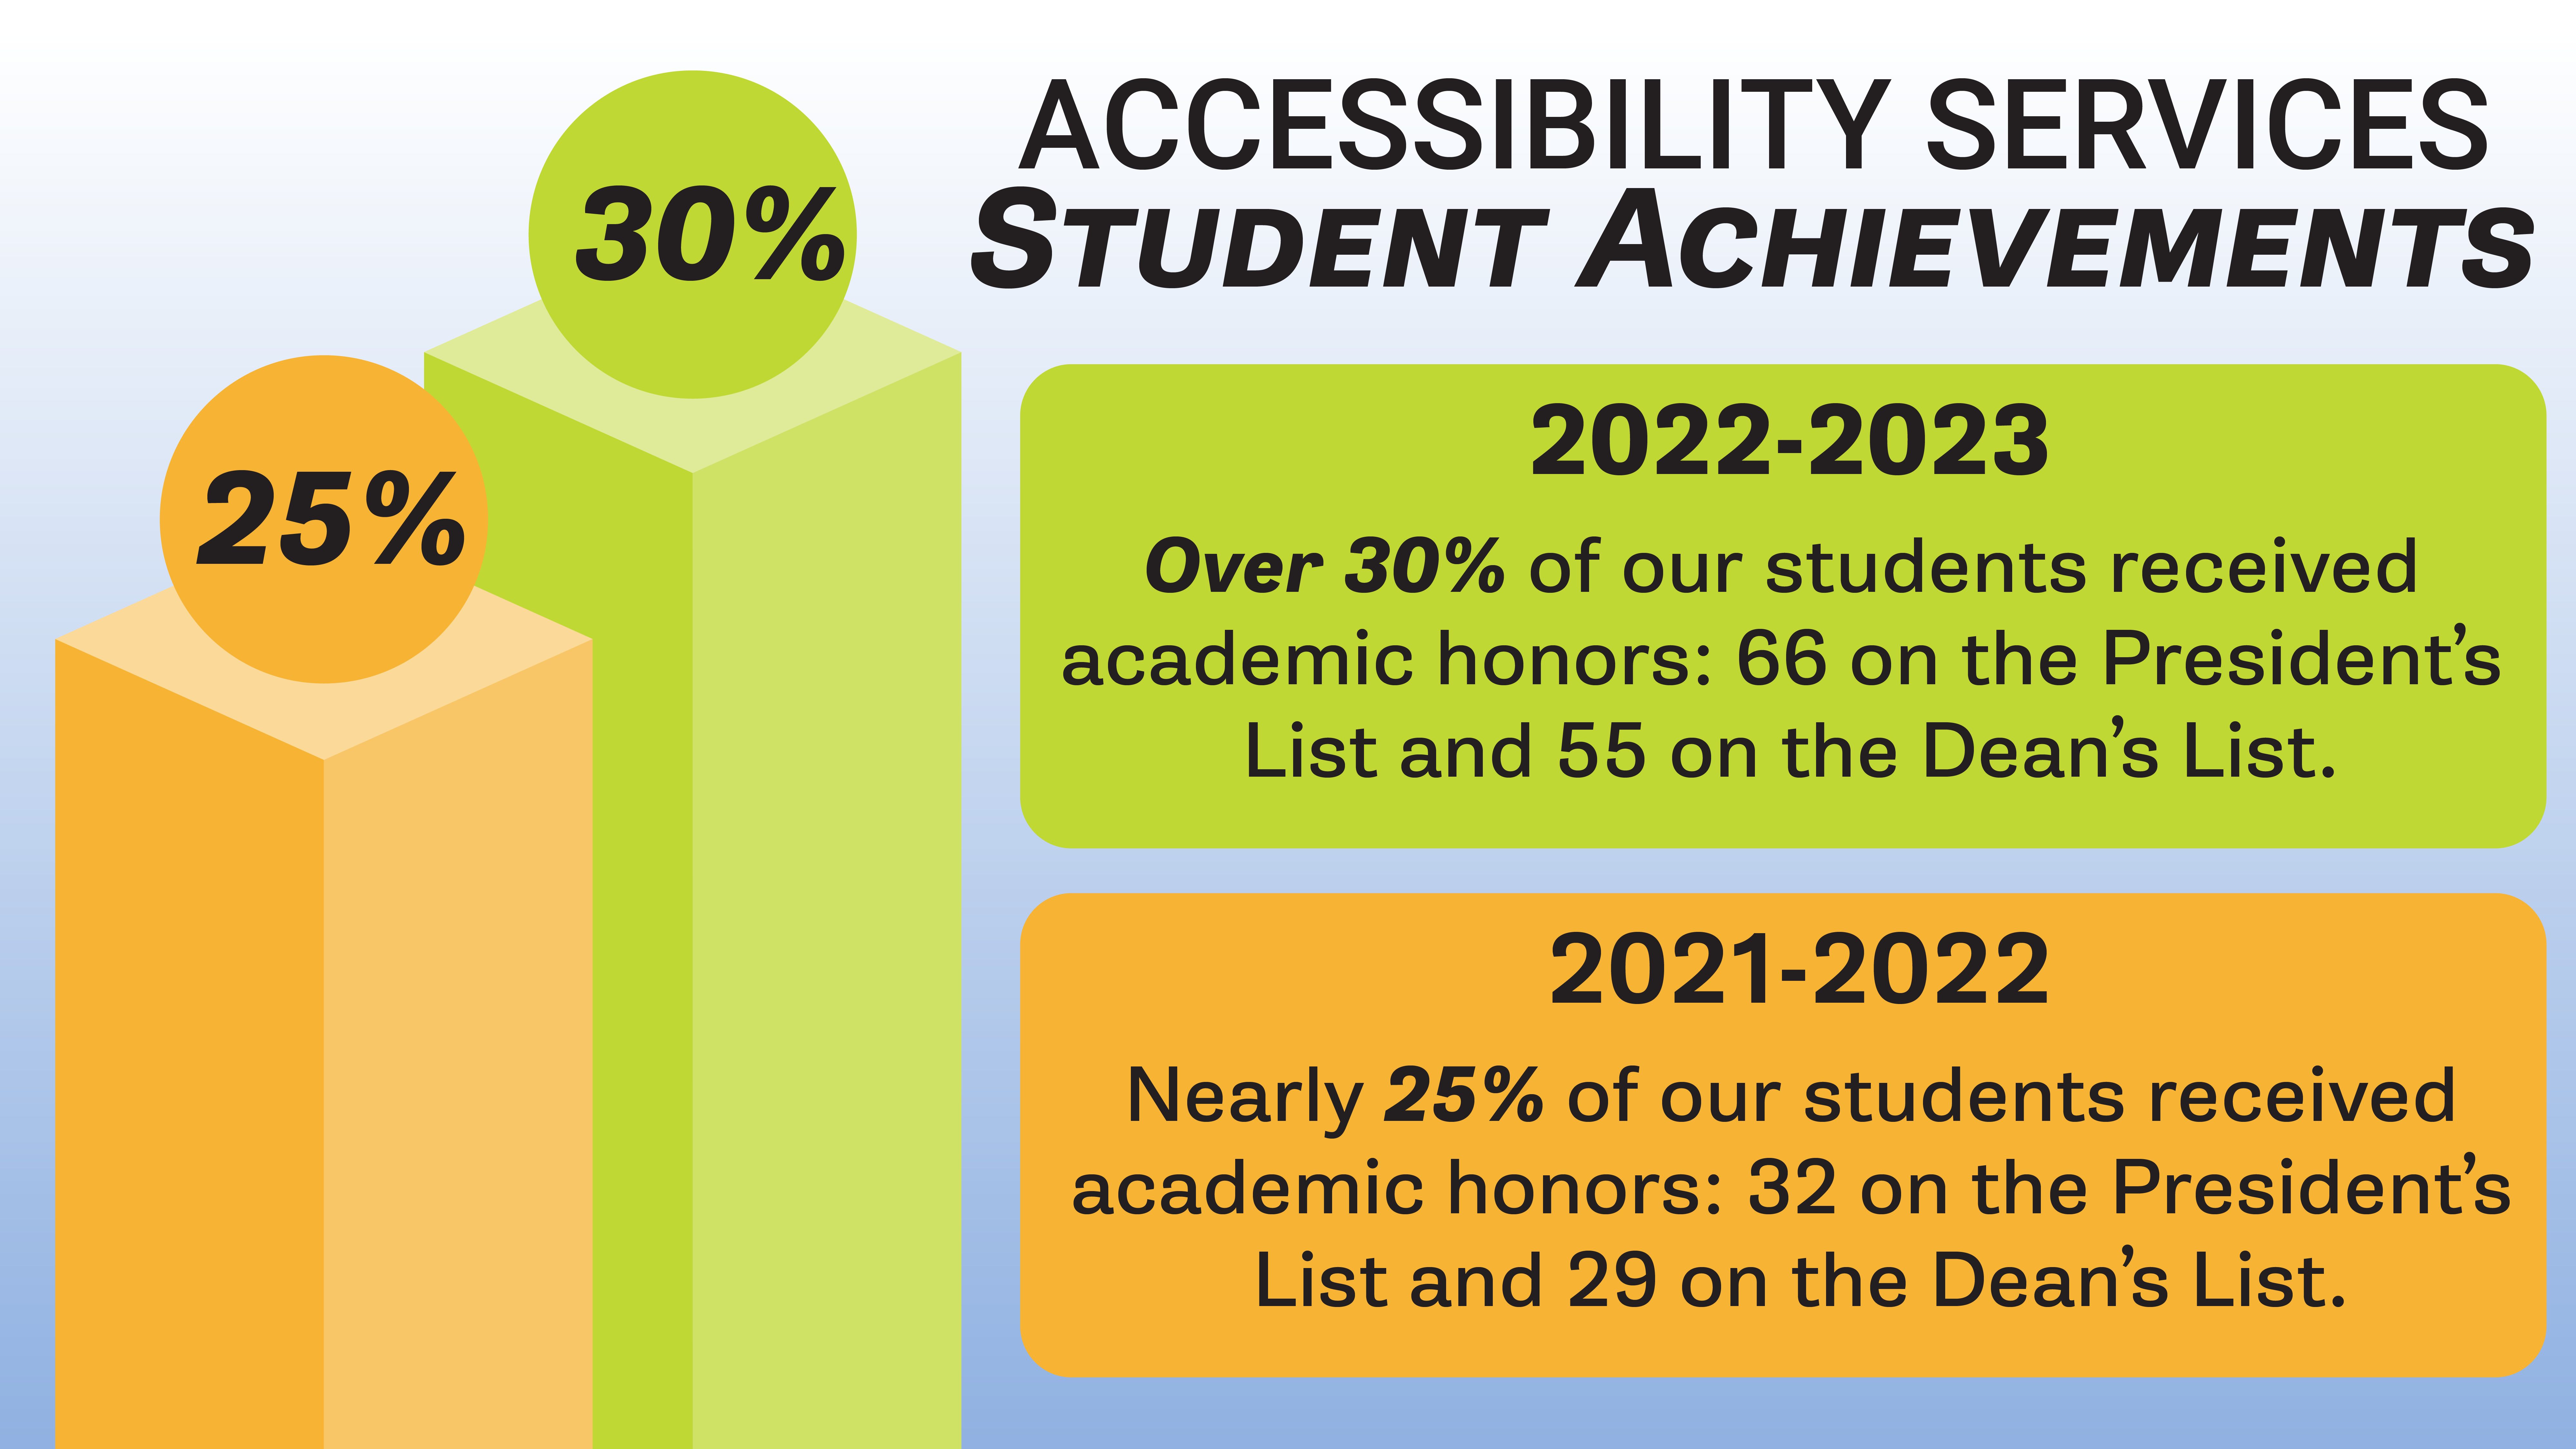 Accessibility Services Student Achievements 2022-2023 Over 30% of our students received academic honors: 66 on the President’s List and 55 on the Dean’s List. 2021-2022 Nearly 25% of our students received academic honors: 32 on the President’s List and 29 on the Dean’s List.